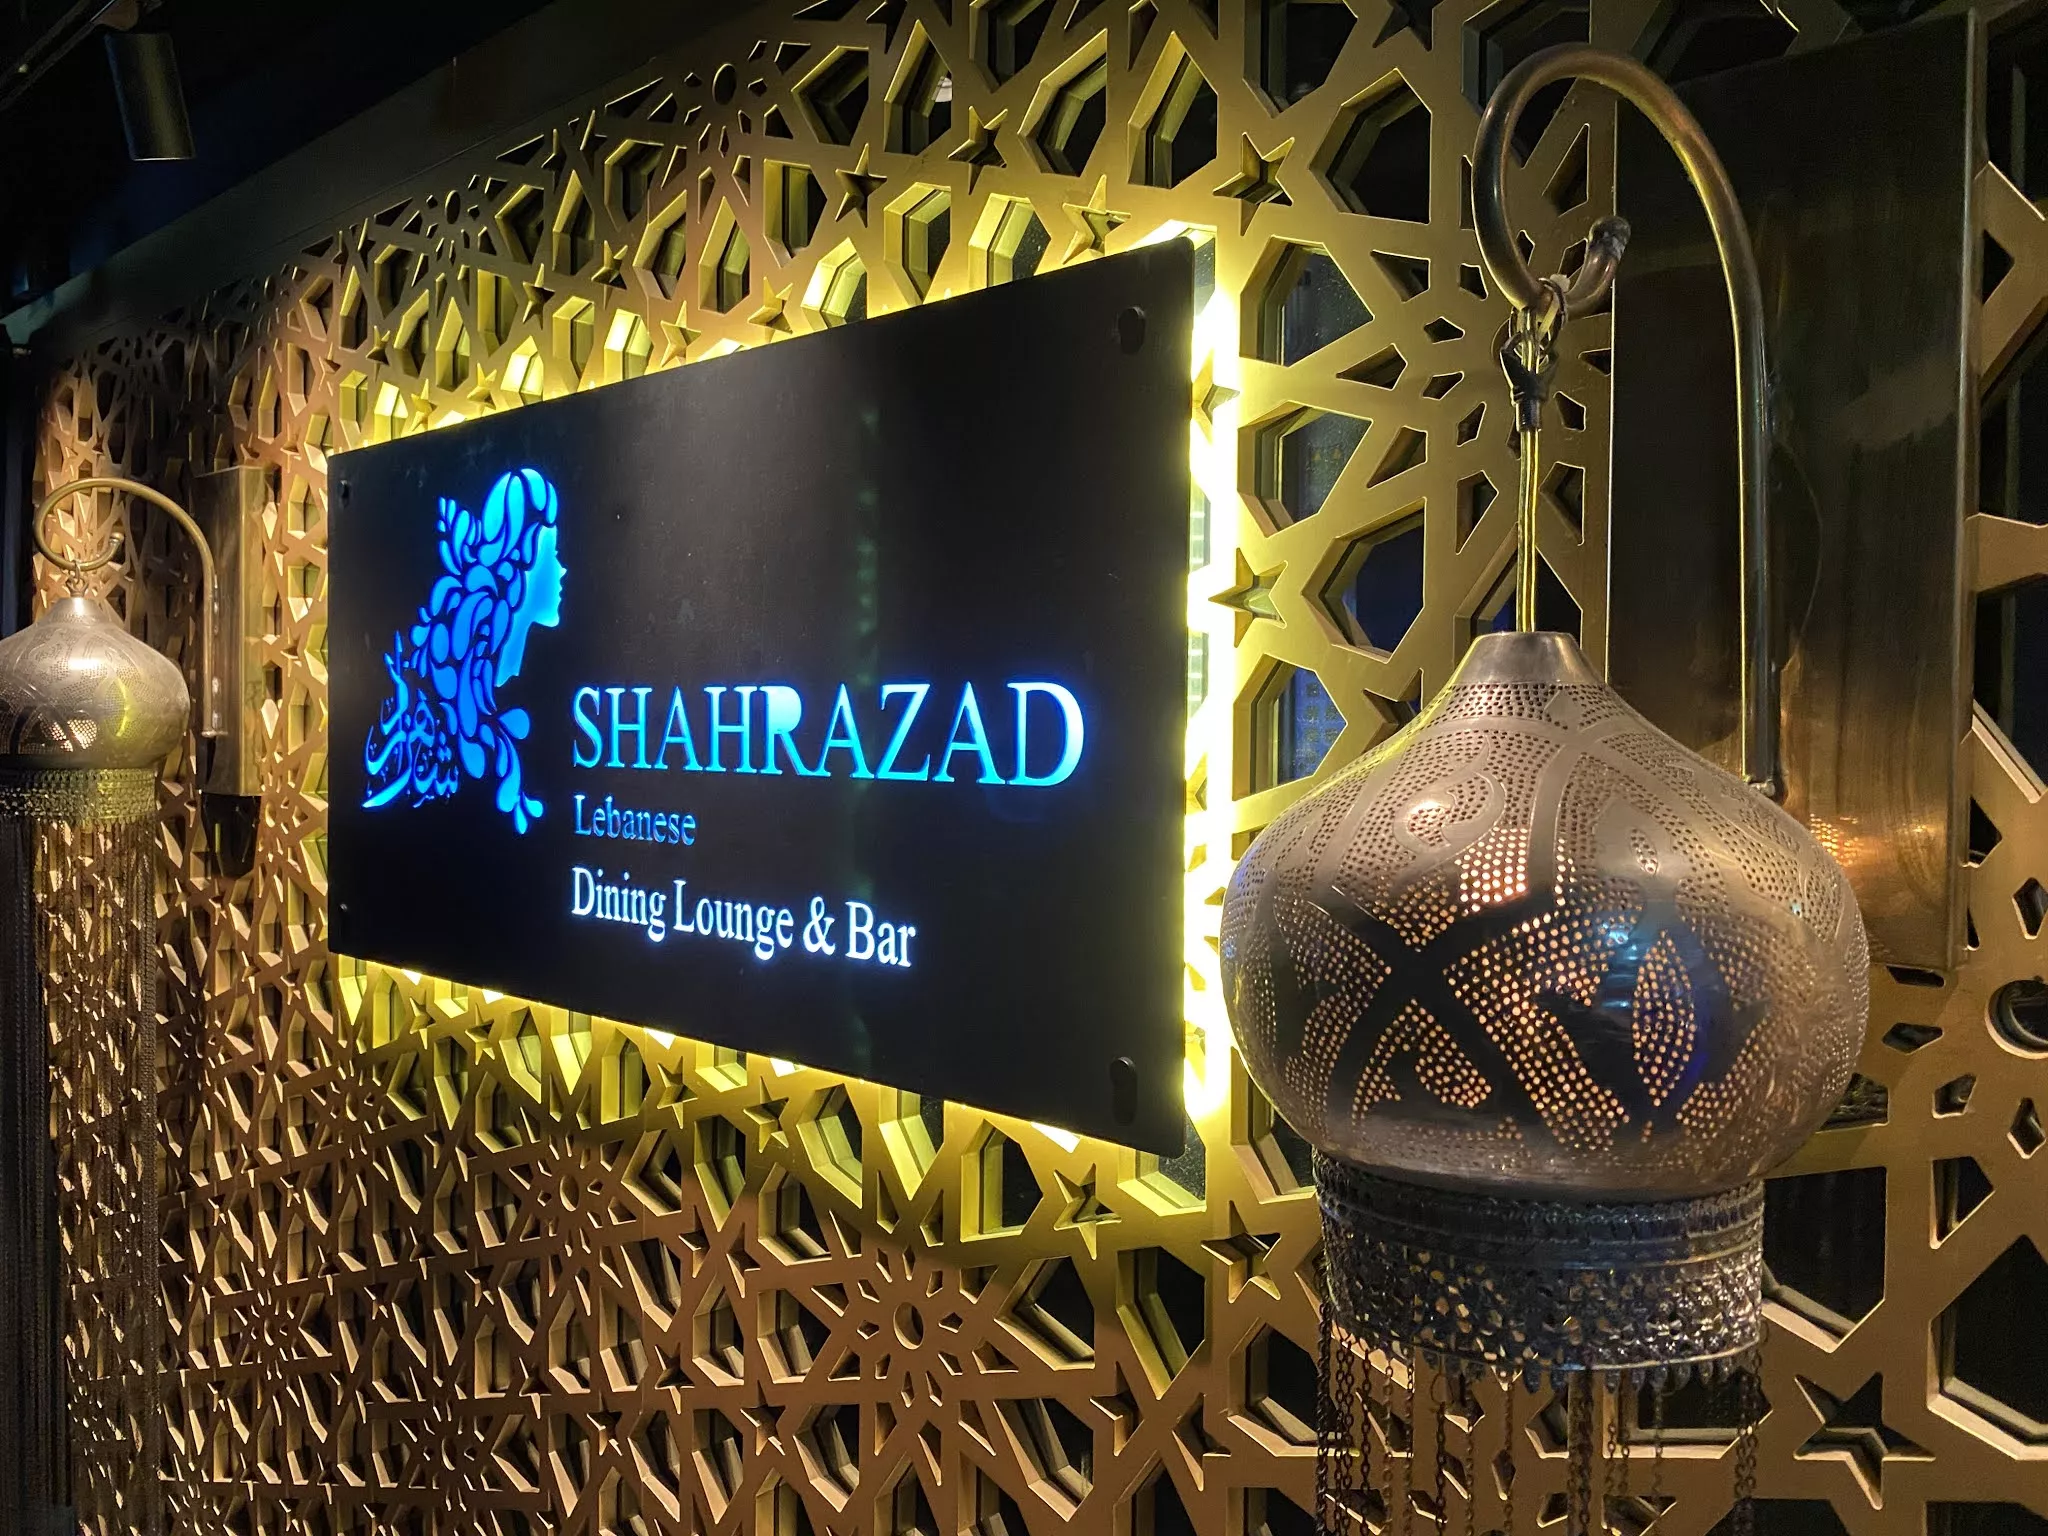 Shahrazad Lebanese Dining Lounge & Bar in China, East Asia | Hookah Lounges,Bars - Rated 3.8